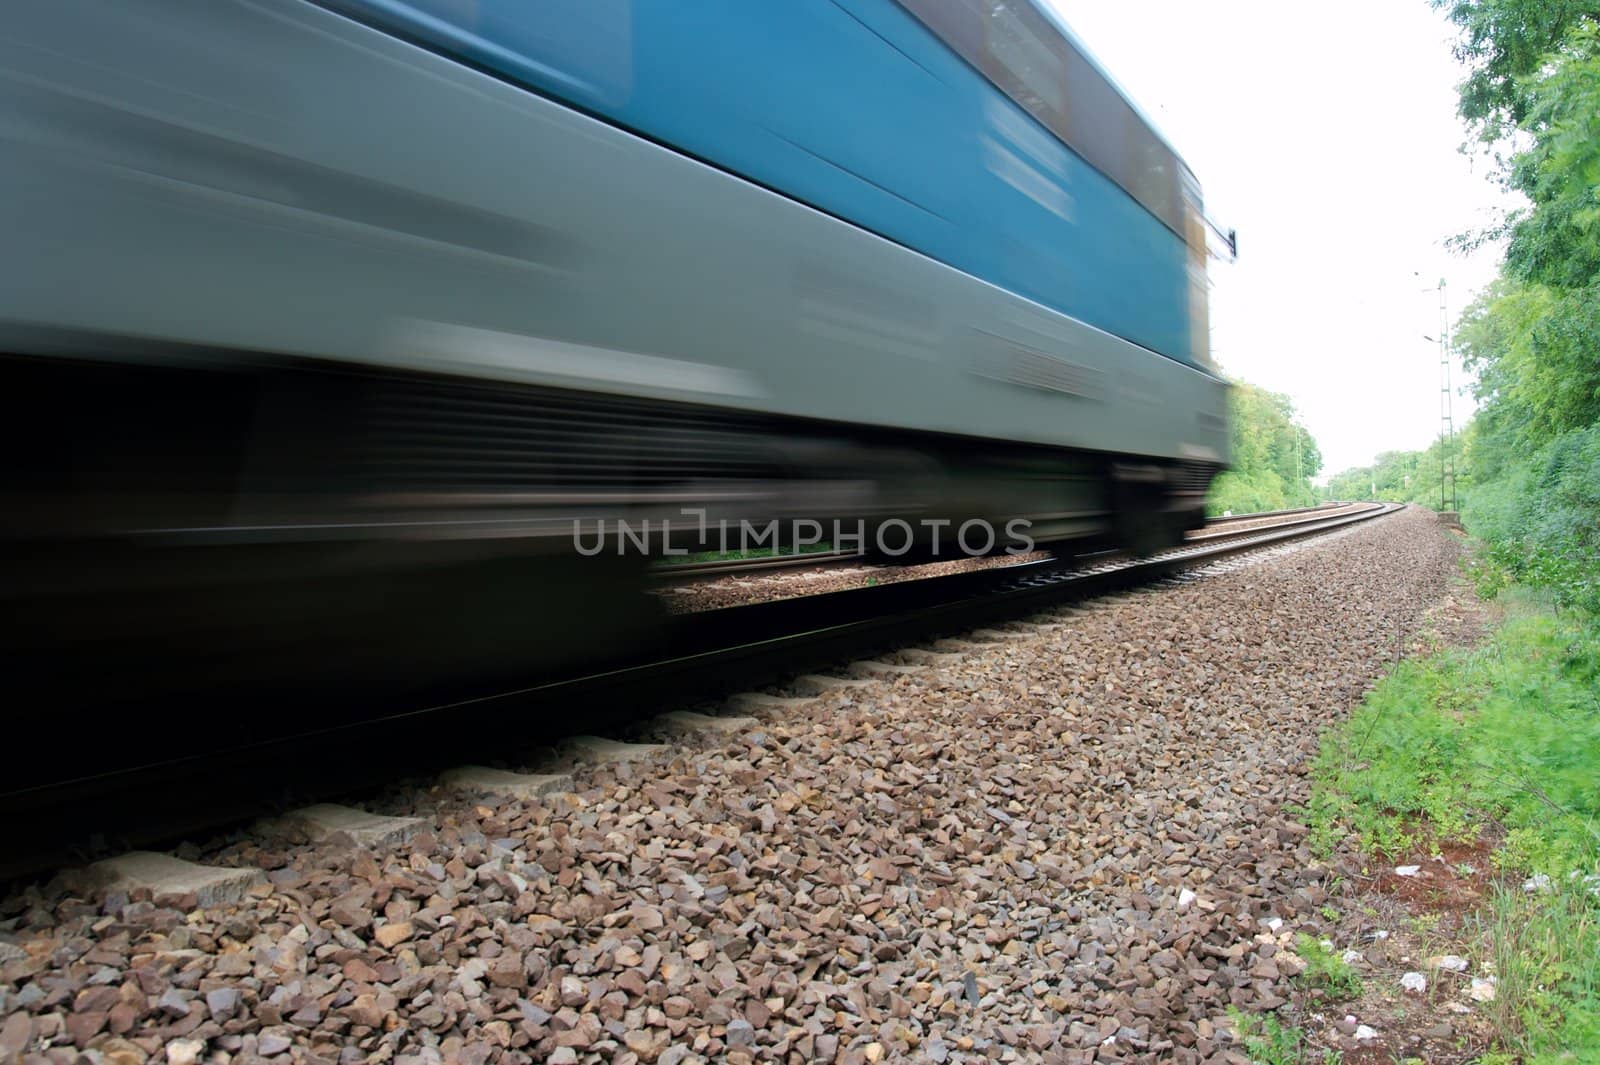 Fast train passing by with motion blur